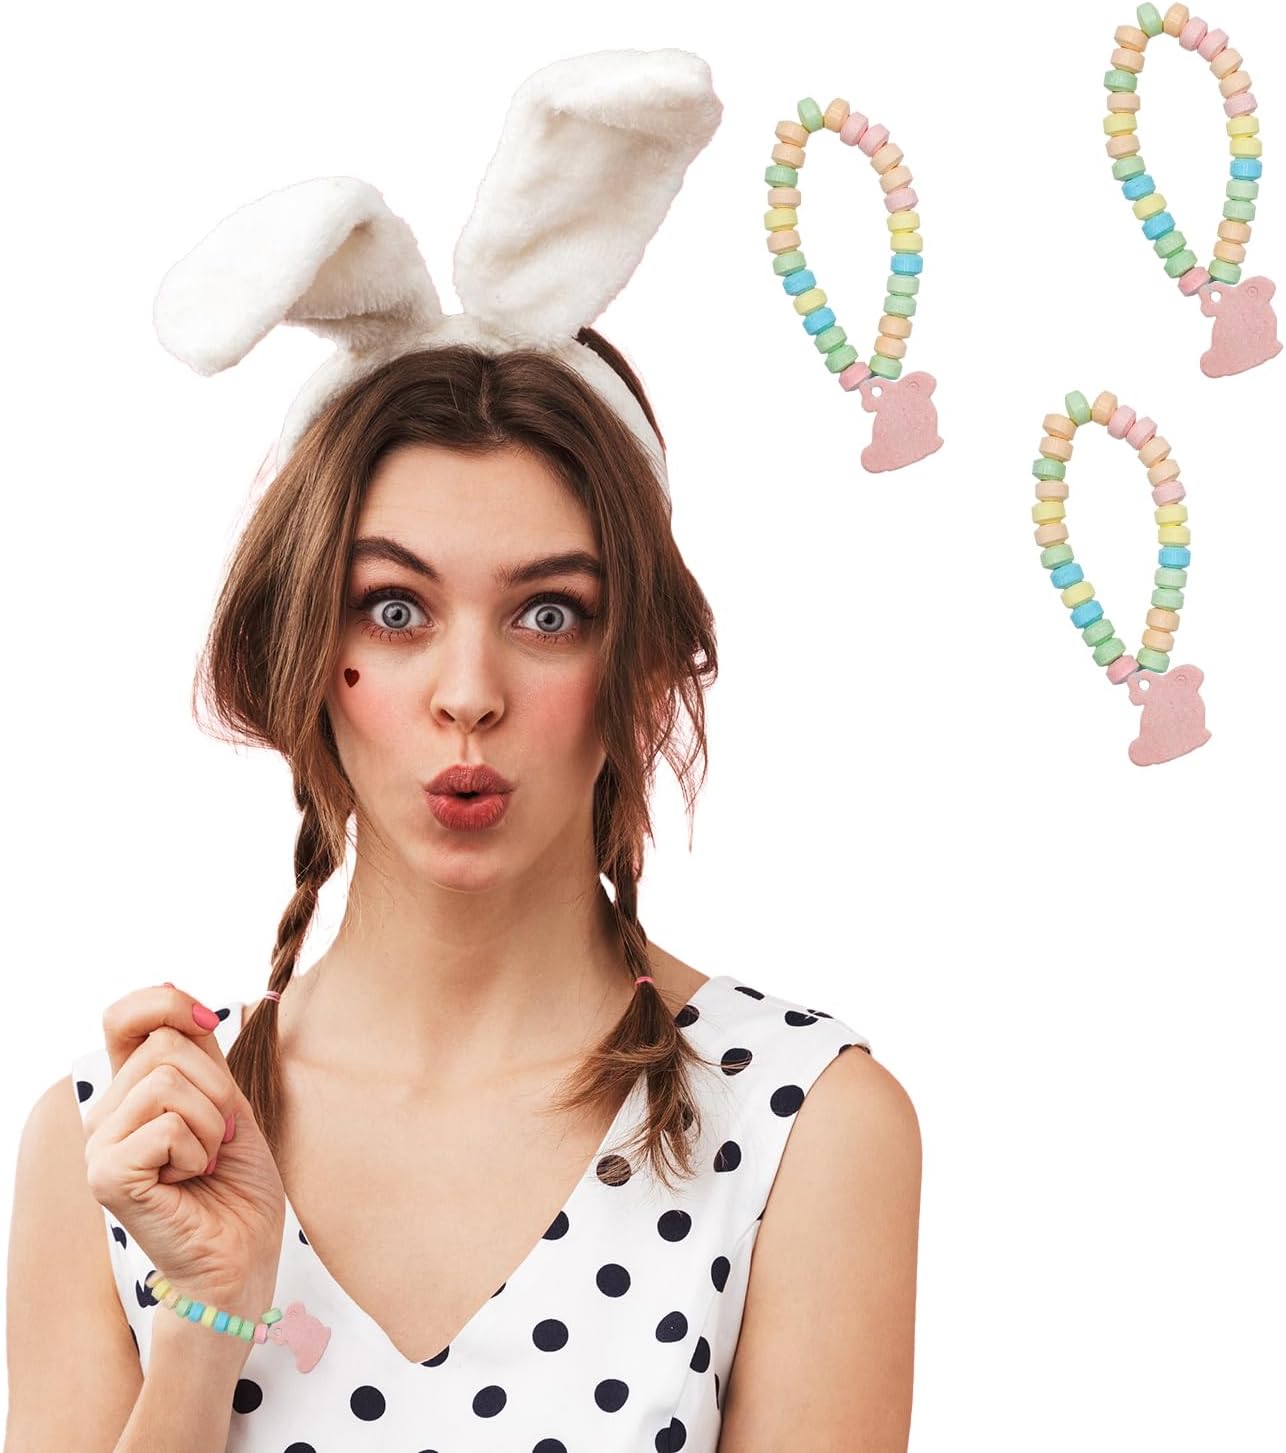 Easter Bunny Candy Bracelet, Multicolor Fruit-Flavored Chewables for Party Favors